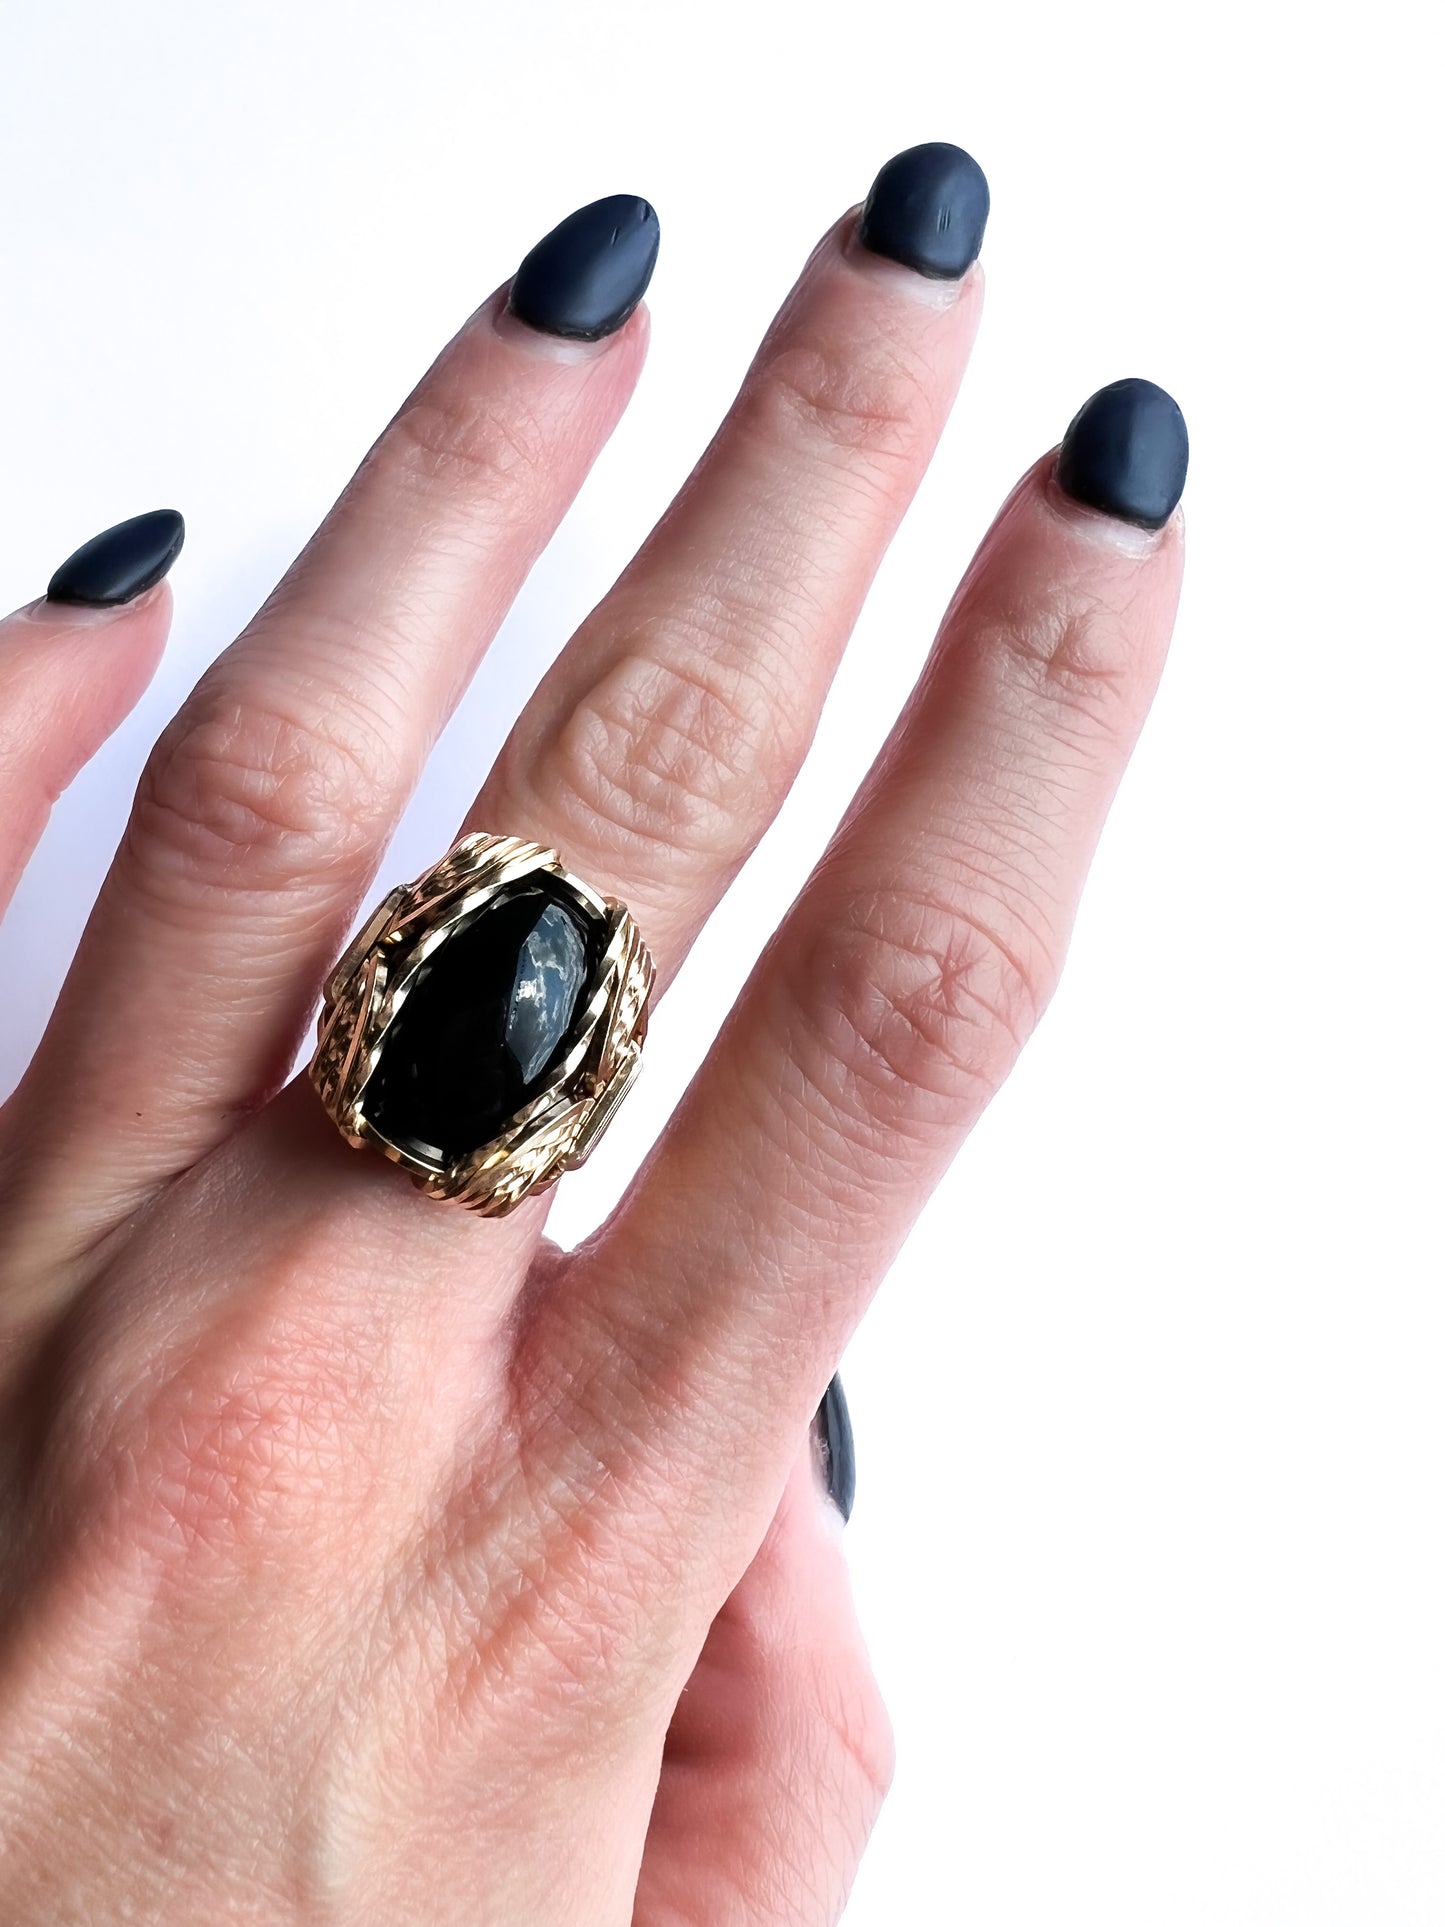 Handcrafted Yellow Gold Black Onyx Ring